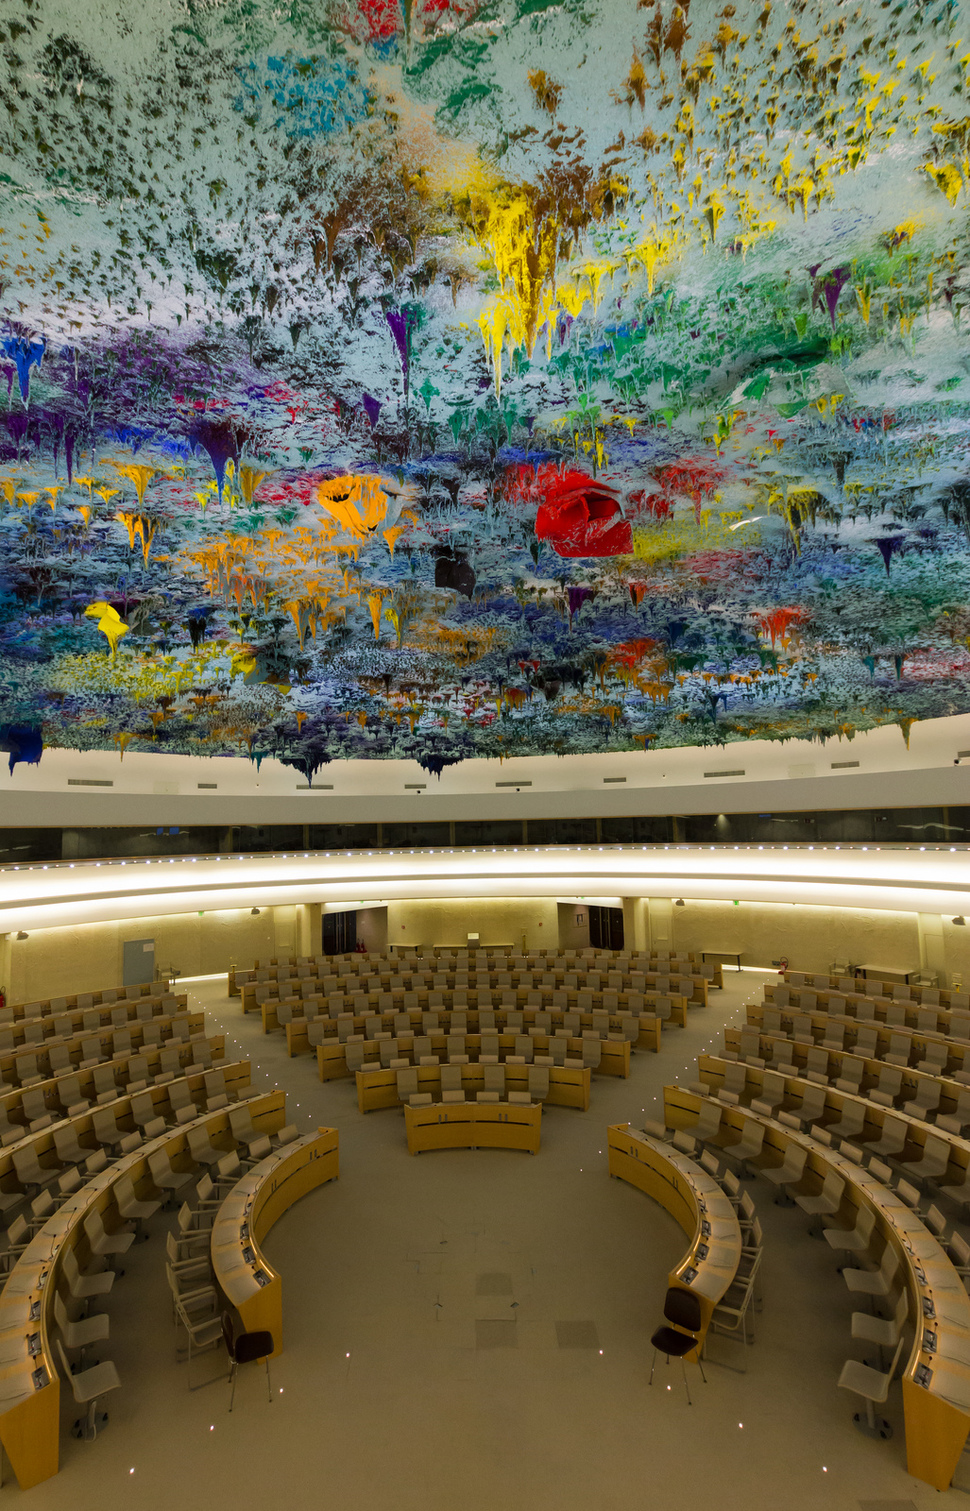 Chamber Of Human Rights And The Alliance Of Civilizations At The United Nations In Geneva, Switzerland